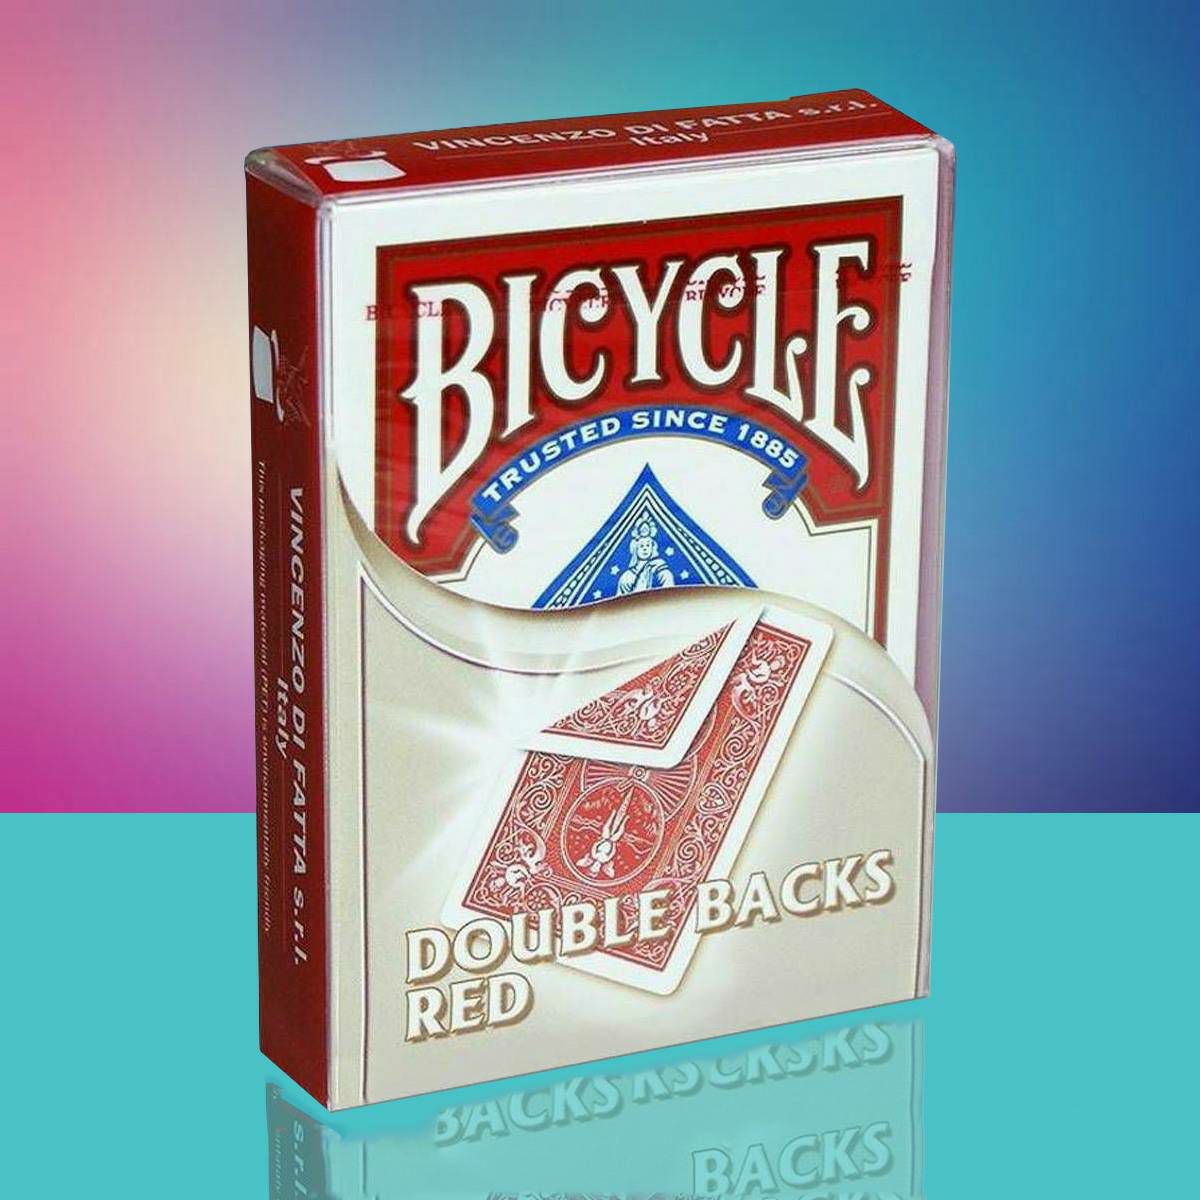 Bicycle Double Back Red & Red